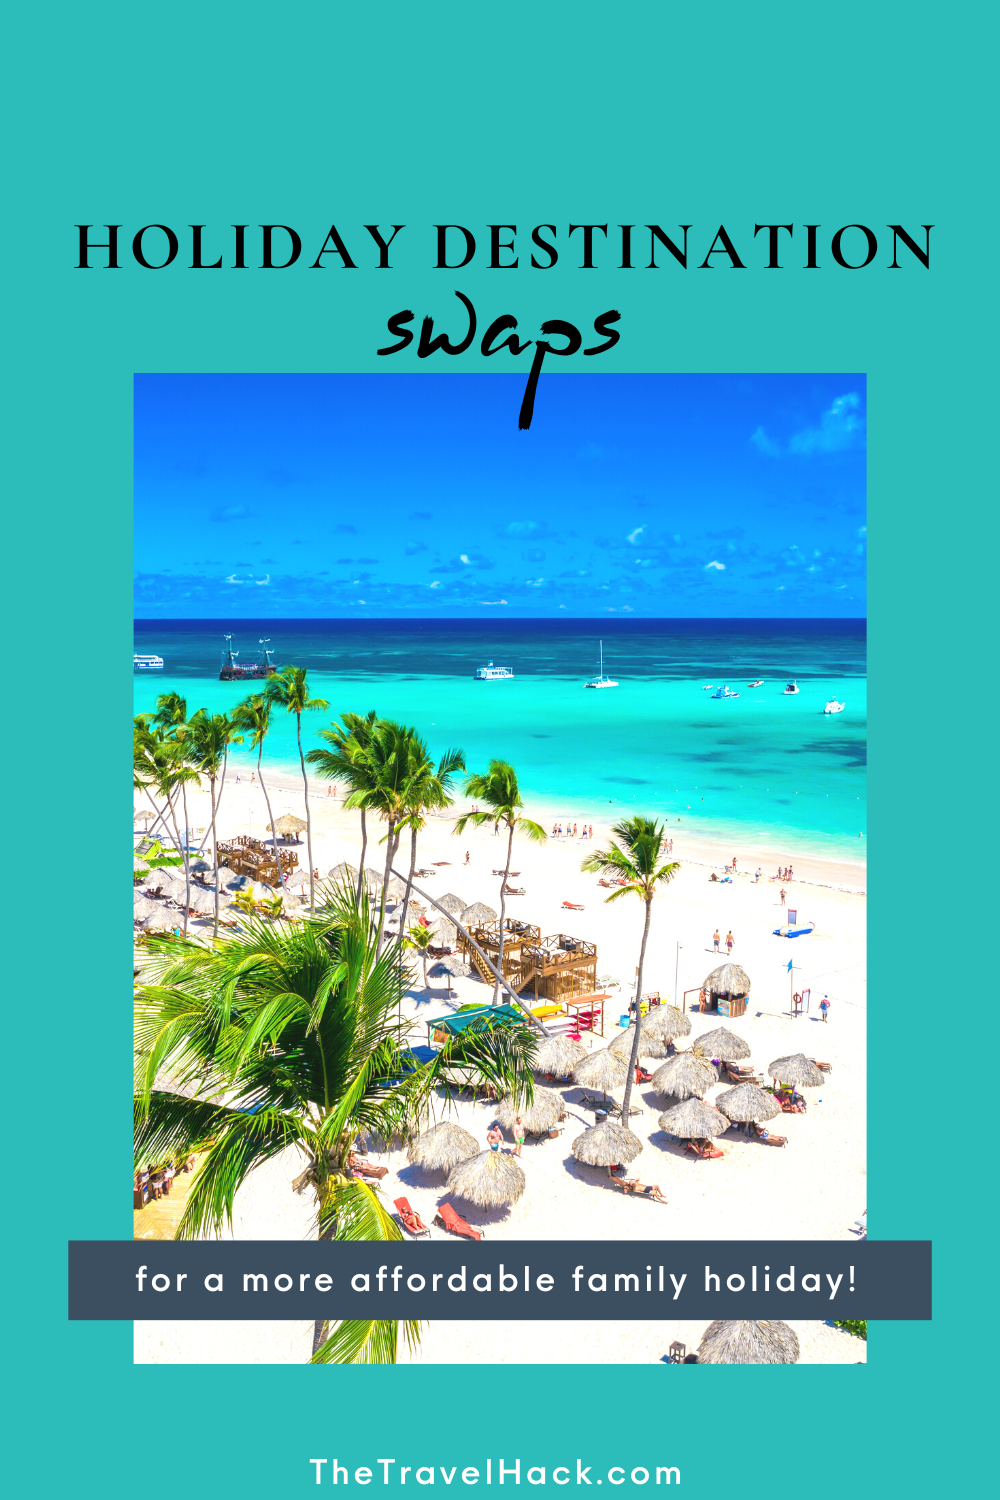 Where to go for a cheap family holiday in 2023? Holiday destination swaps to save money!